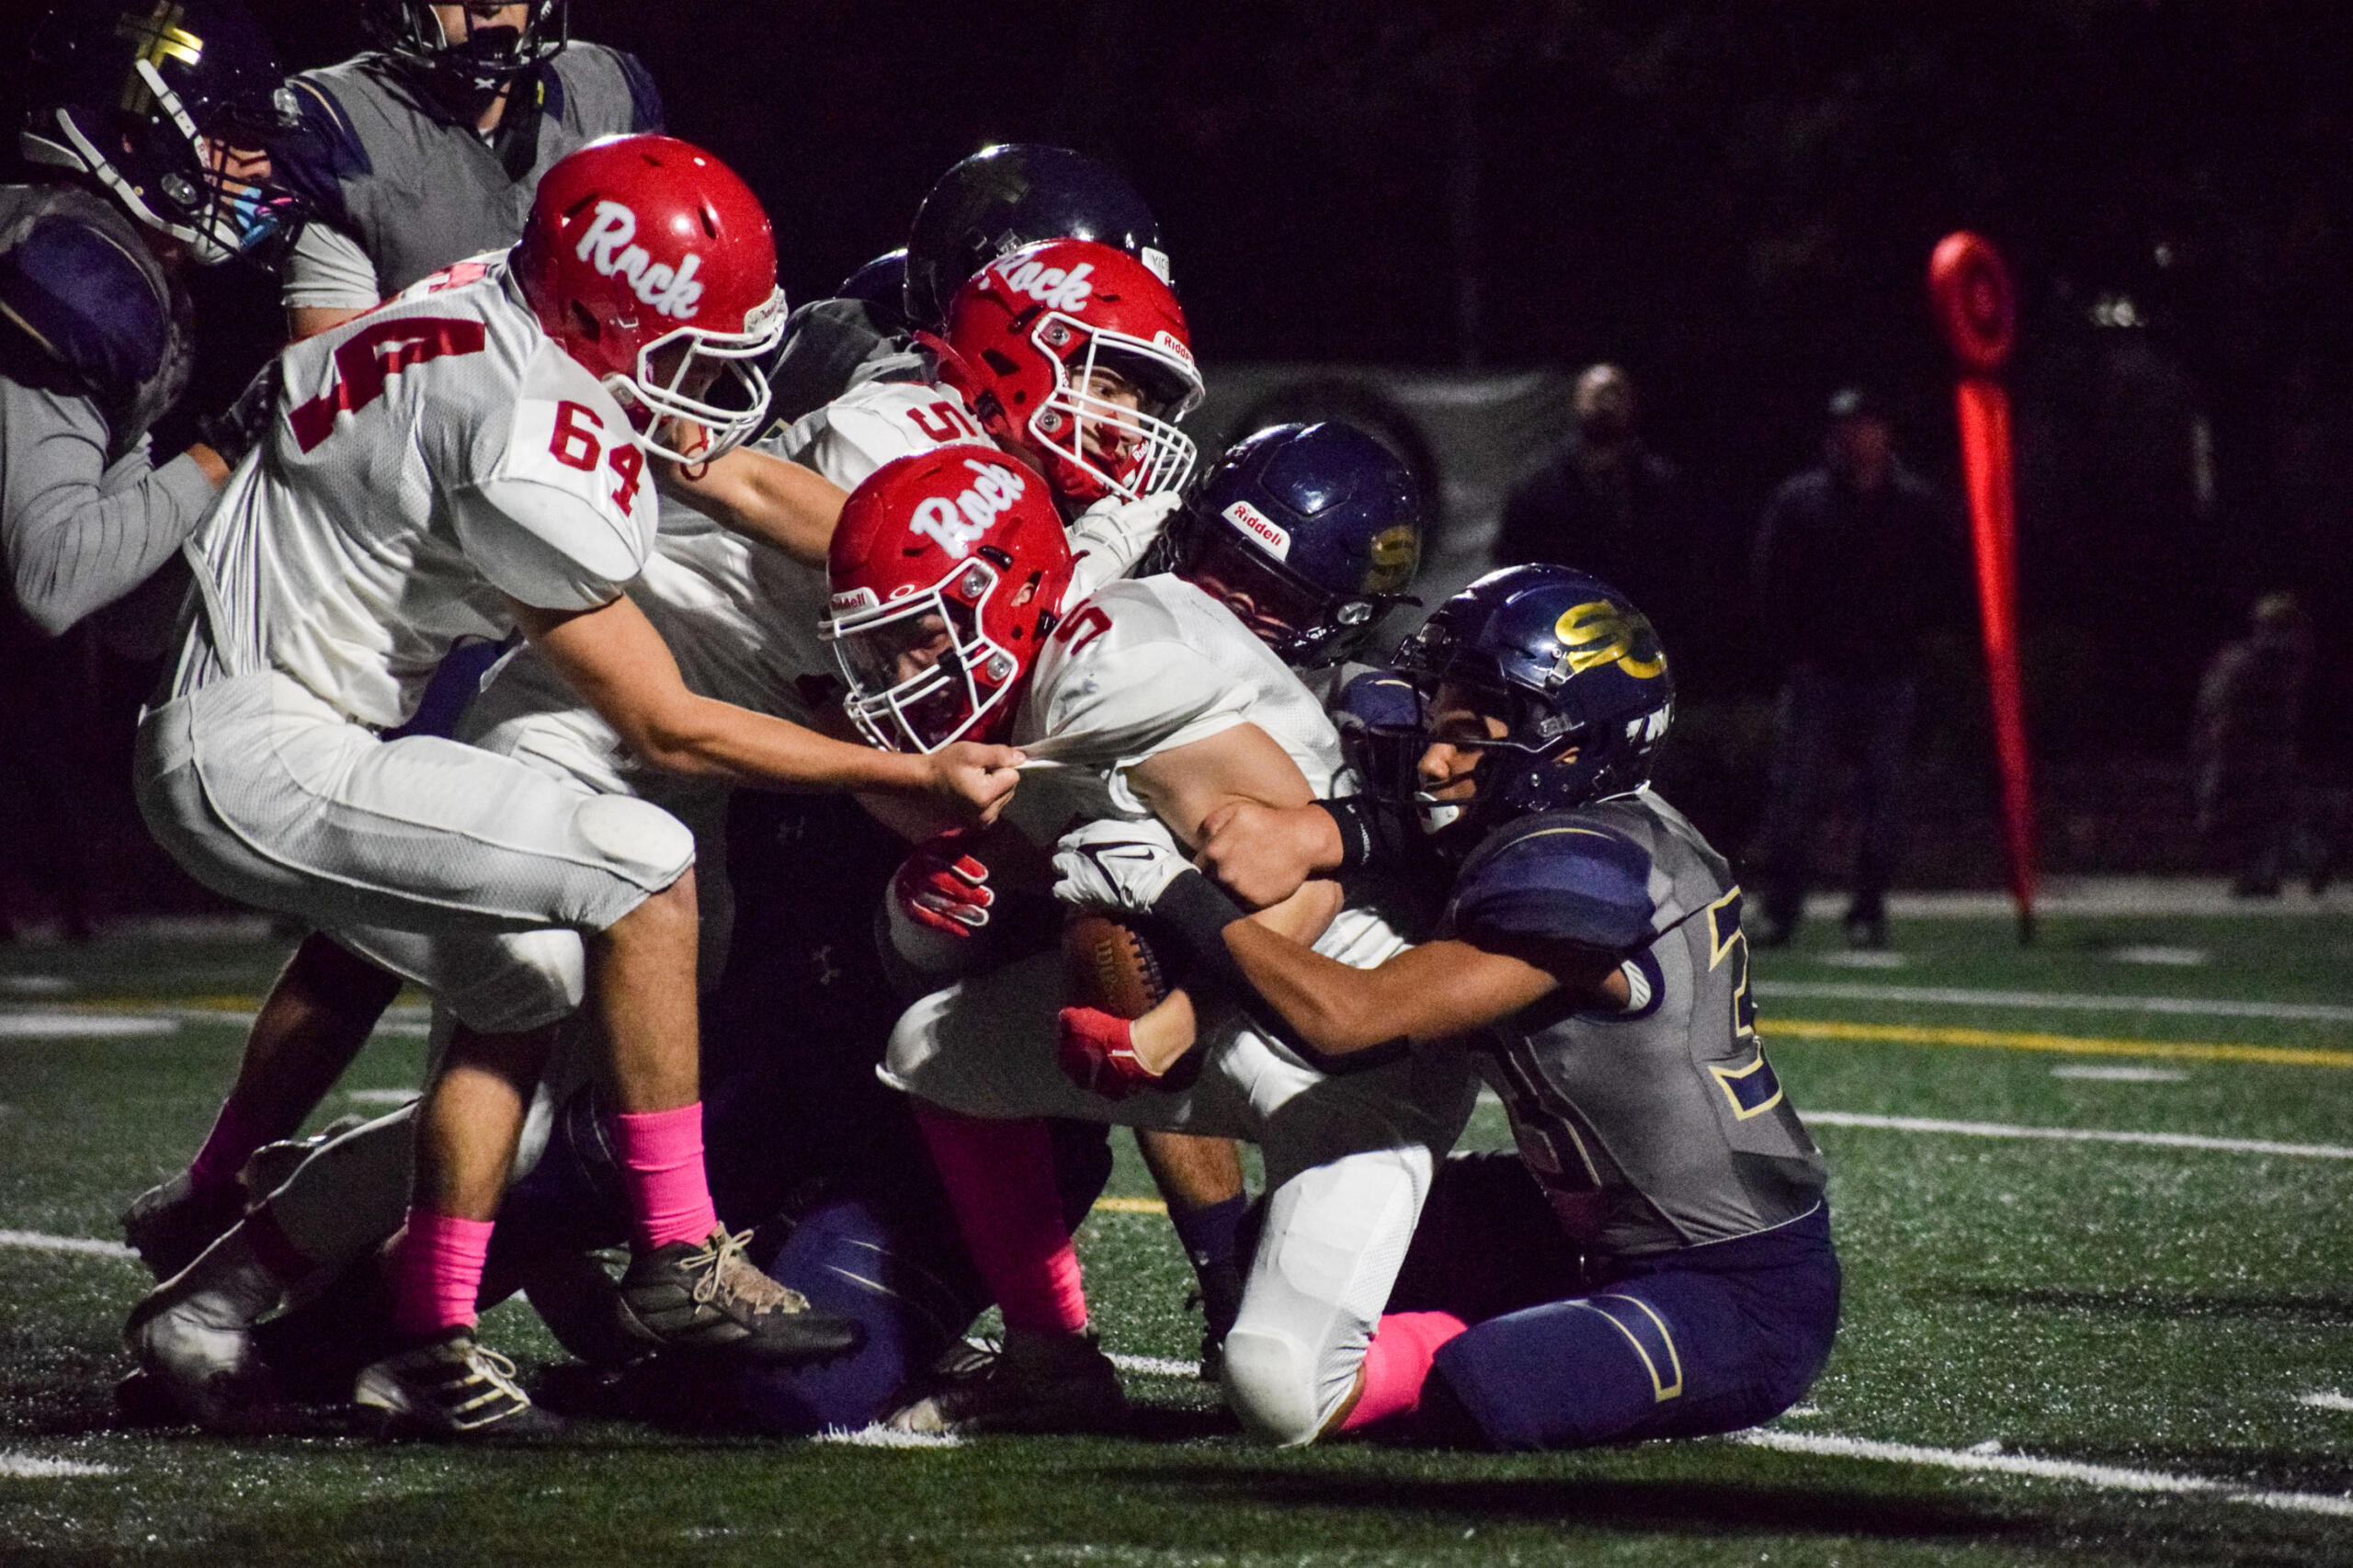 A group of Seton Catholic Cougars try to take down Castle Rock's Chase Rusher (5) while his teammates try to keep him on his feet on Friday.